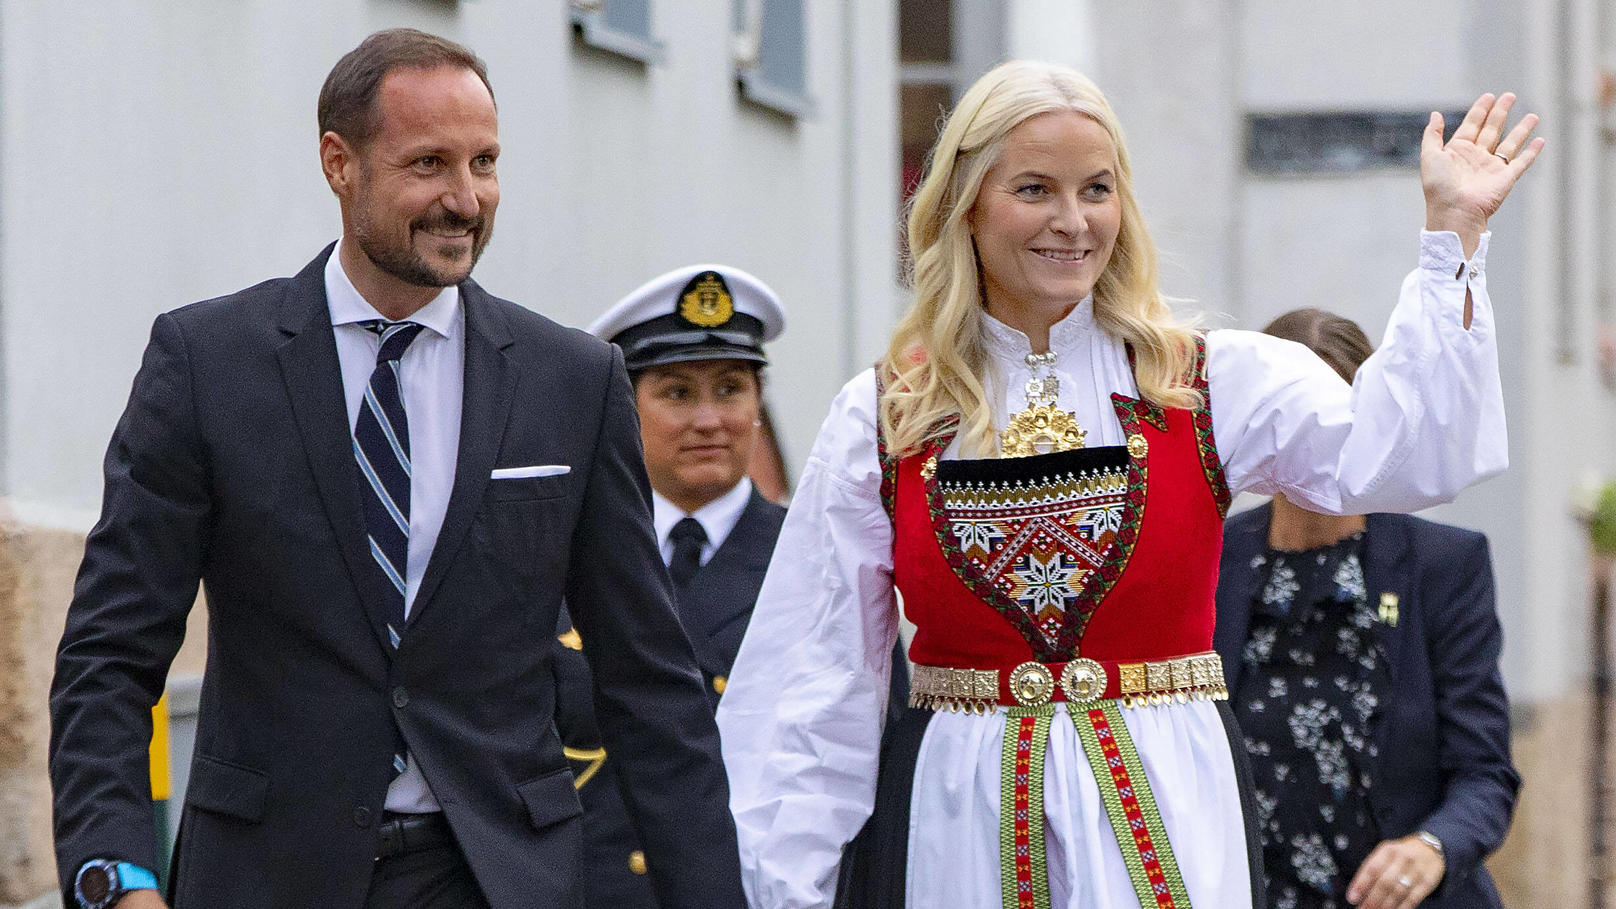  29-09-2021 Norway Princess Mette Marit and Prince Haakon arriving for diner at Frederikstad in Valer on the 2nd day of the 3 day in Viken county in Norway.  PUBLICATIONxINxGERxSUIxAUTxONLY Copyright: xPPEx